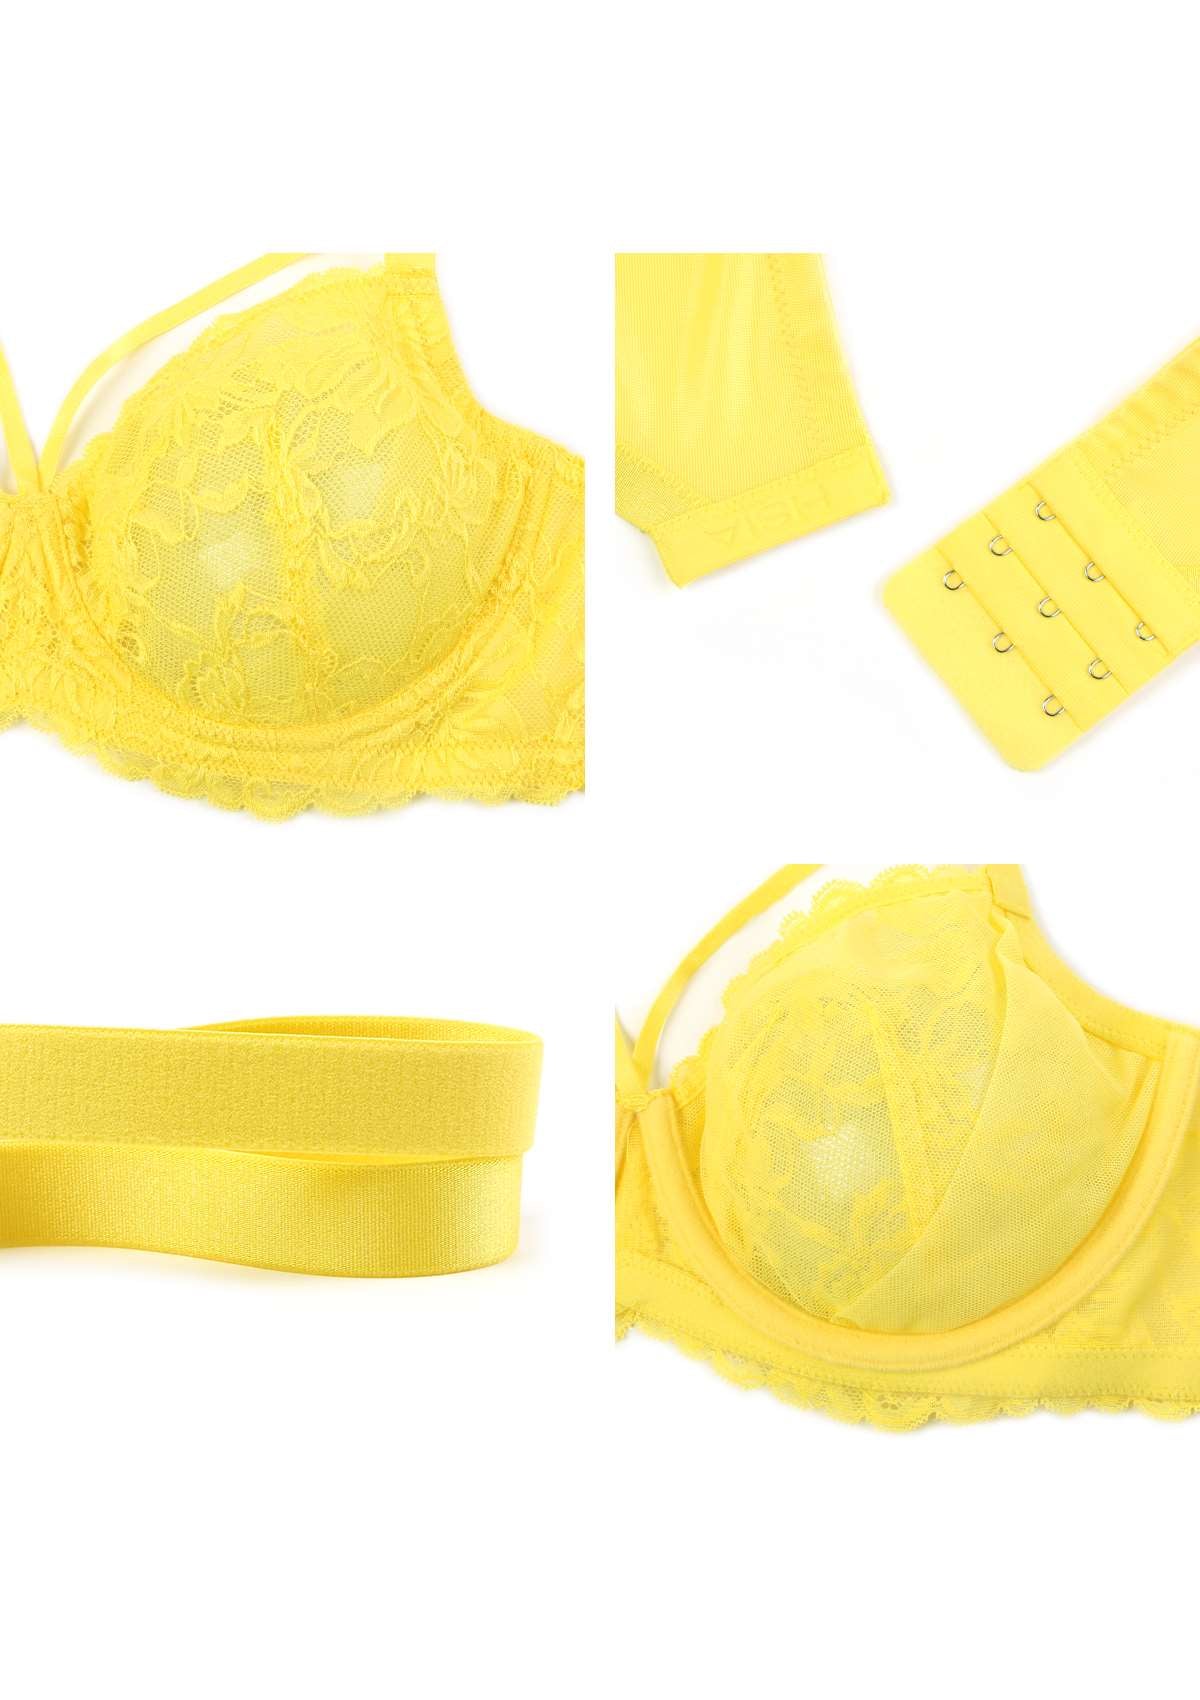 HSIA Unlined Lace Mesh Minimizer Bra For Large Breasts, Full Coverage - Bright Yellow / 42 / C